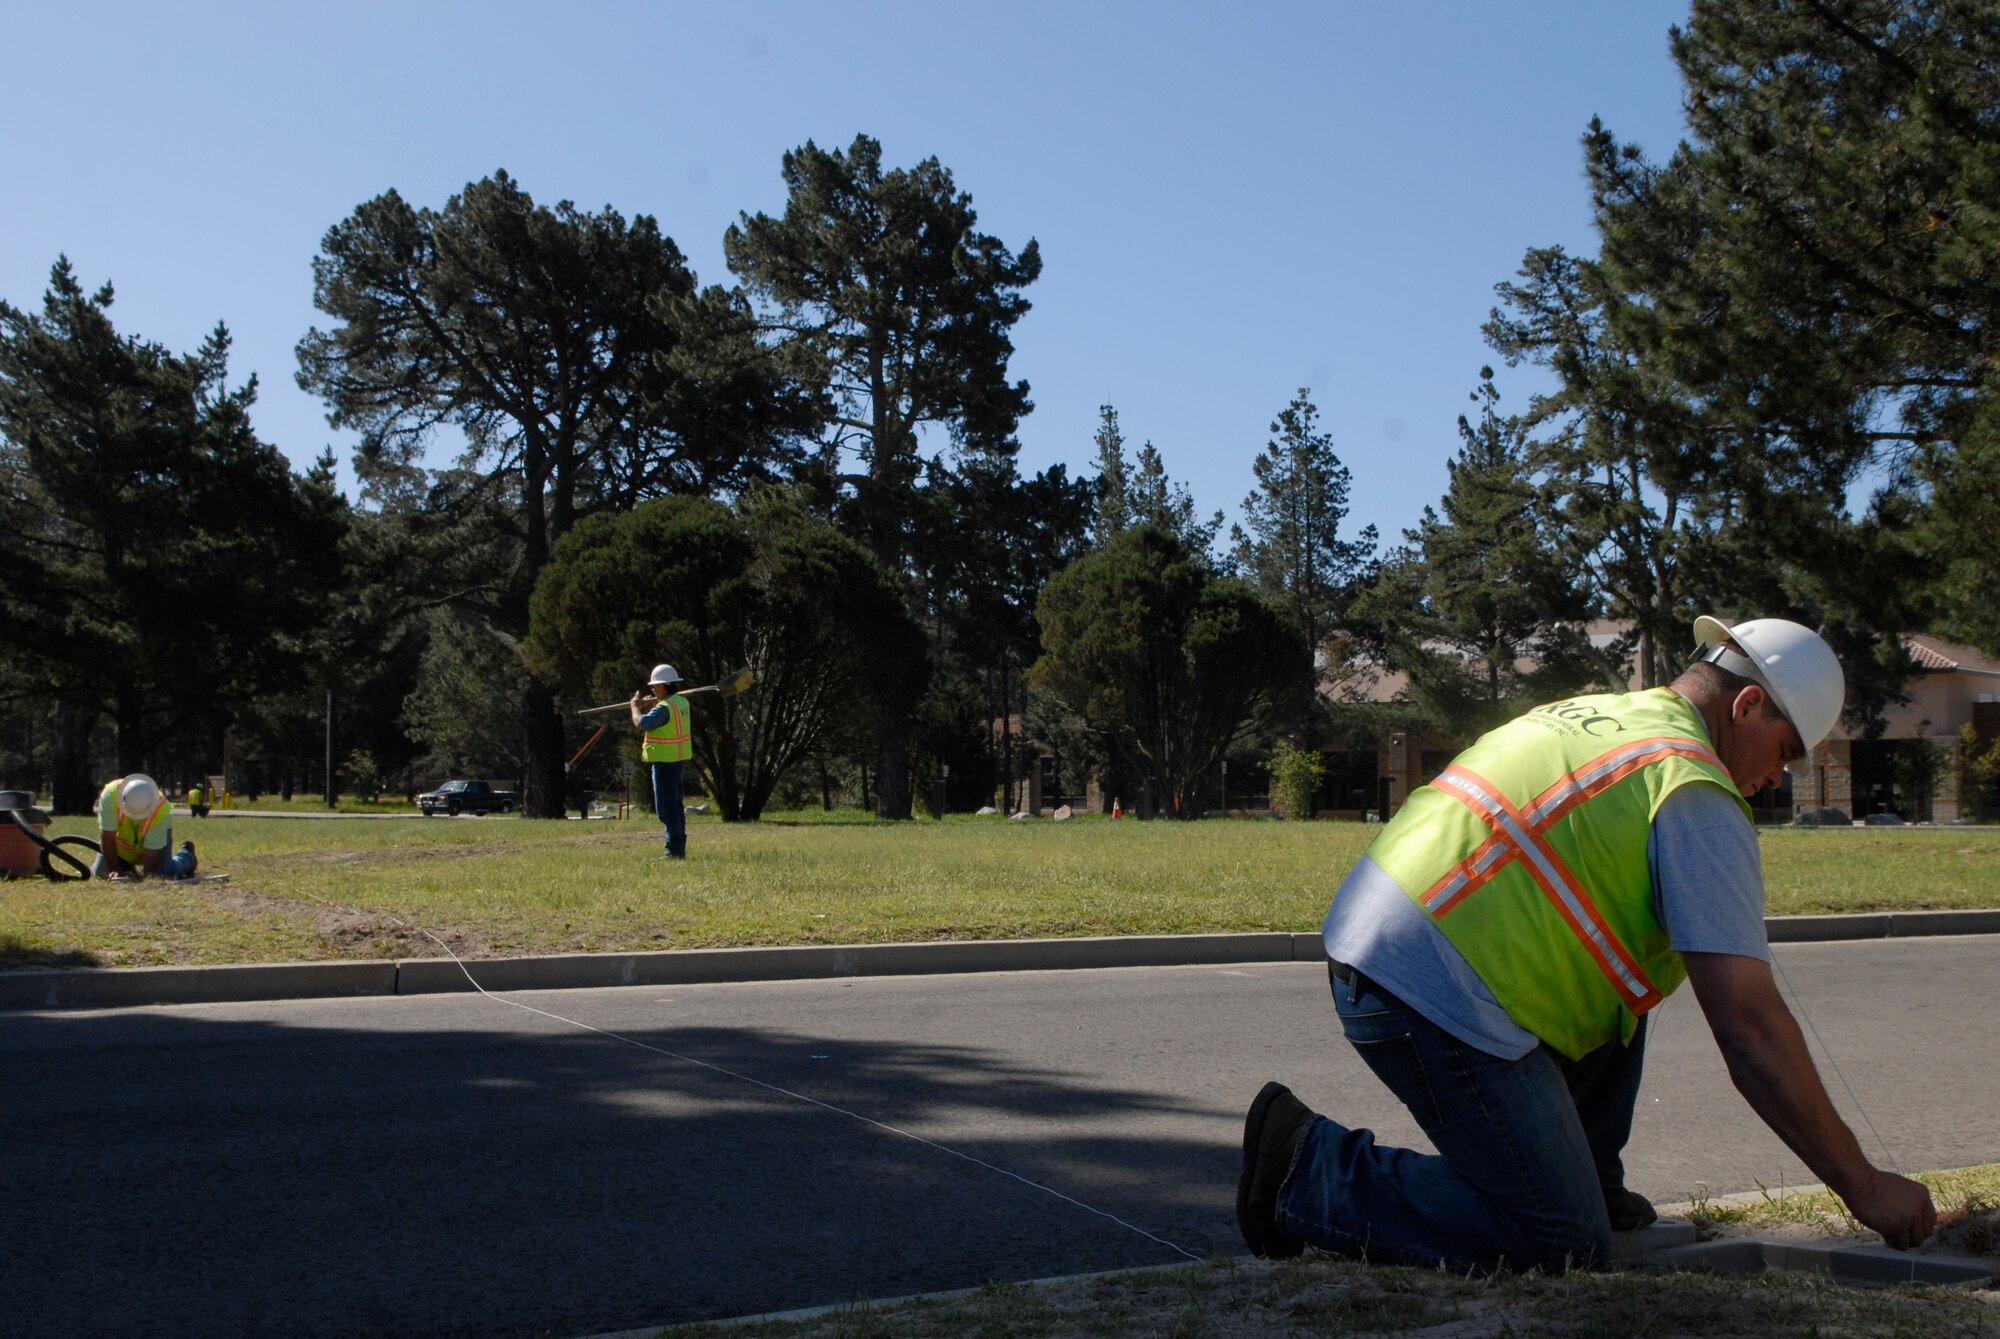 VANDENBERG AIR FORCE BASE, Calif. -- Chad Lorton, a contractor with the Rockwood General Contractors company, measures the area with Jeff Whitaker, a RGC contractor, to put new light poles in the ground near the Vandenberg Fitness Center here Thursday, April 8, 2010.  (U.S. Air Force photo/Senior Airman Andrew Satran) 

 